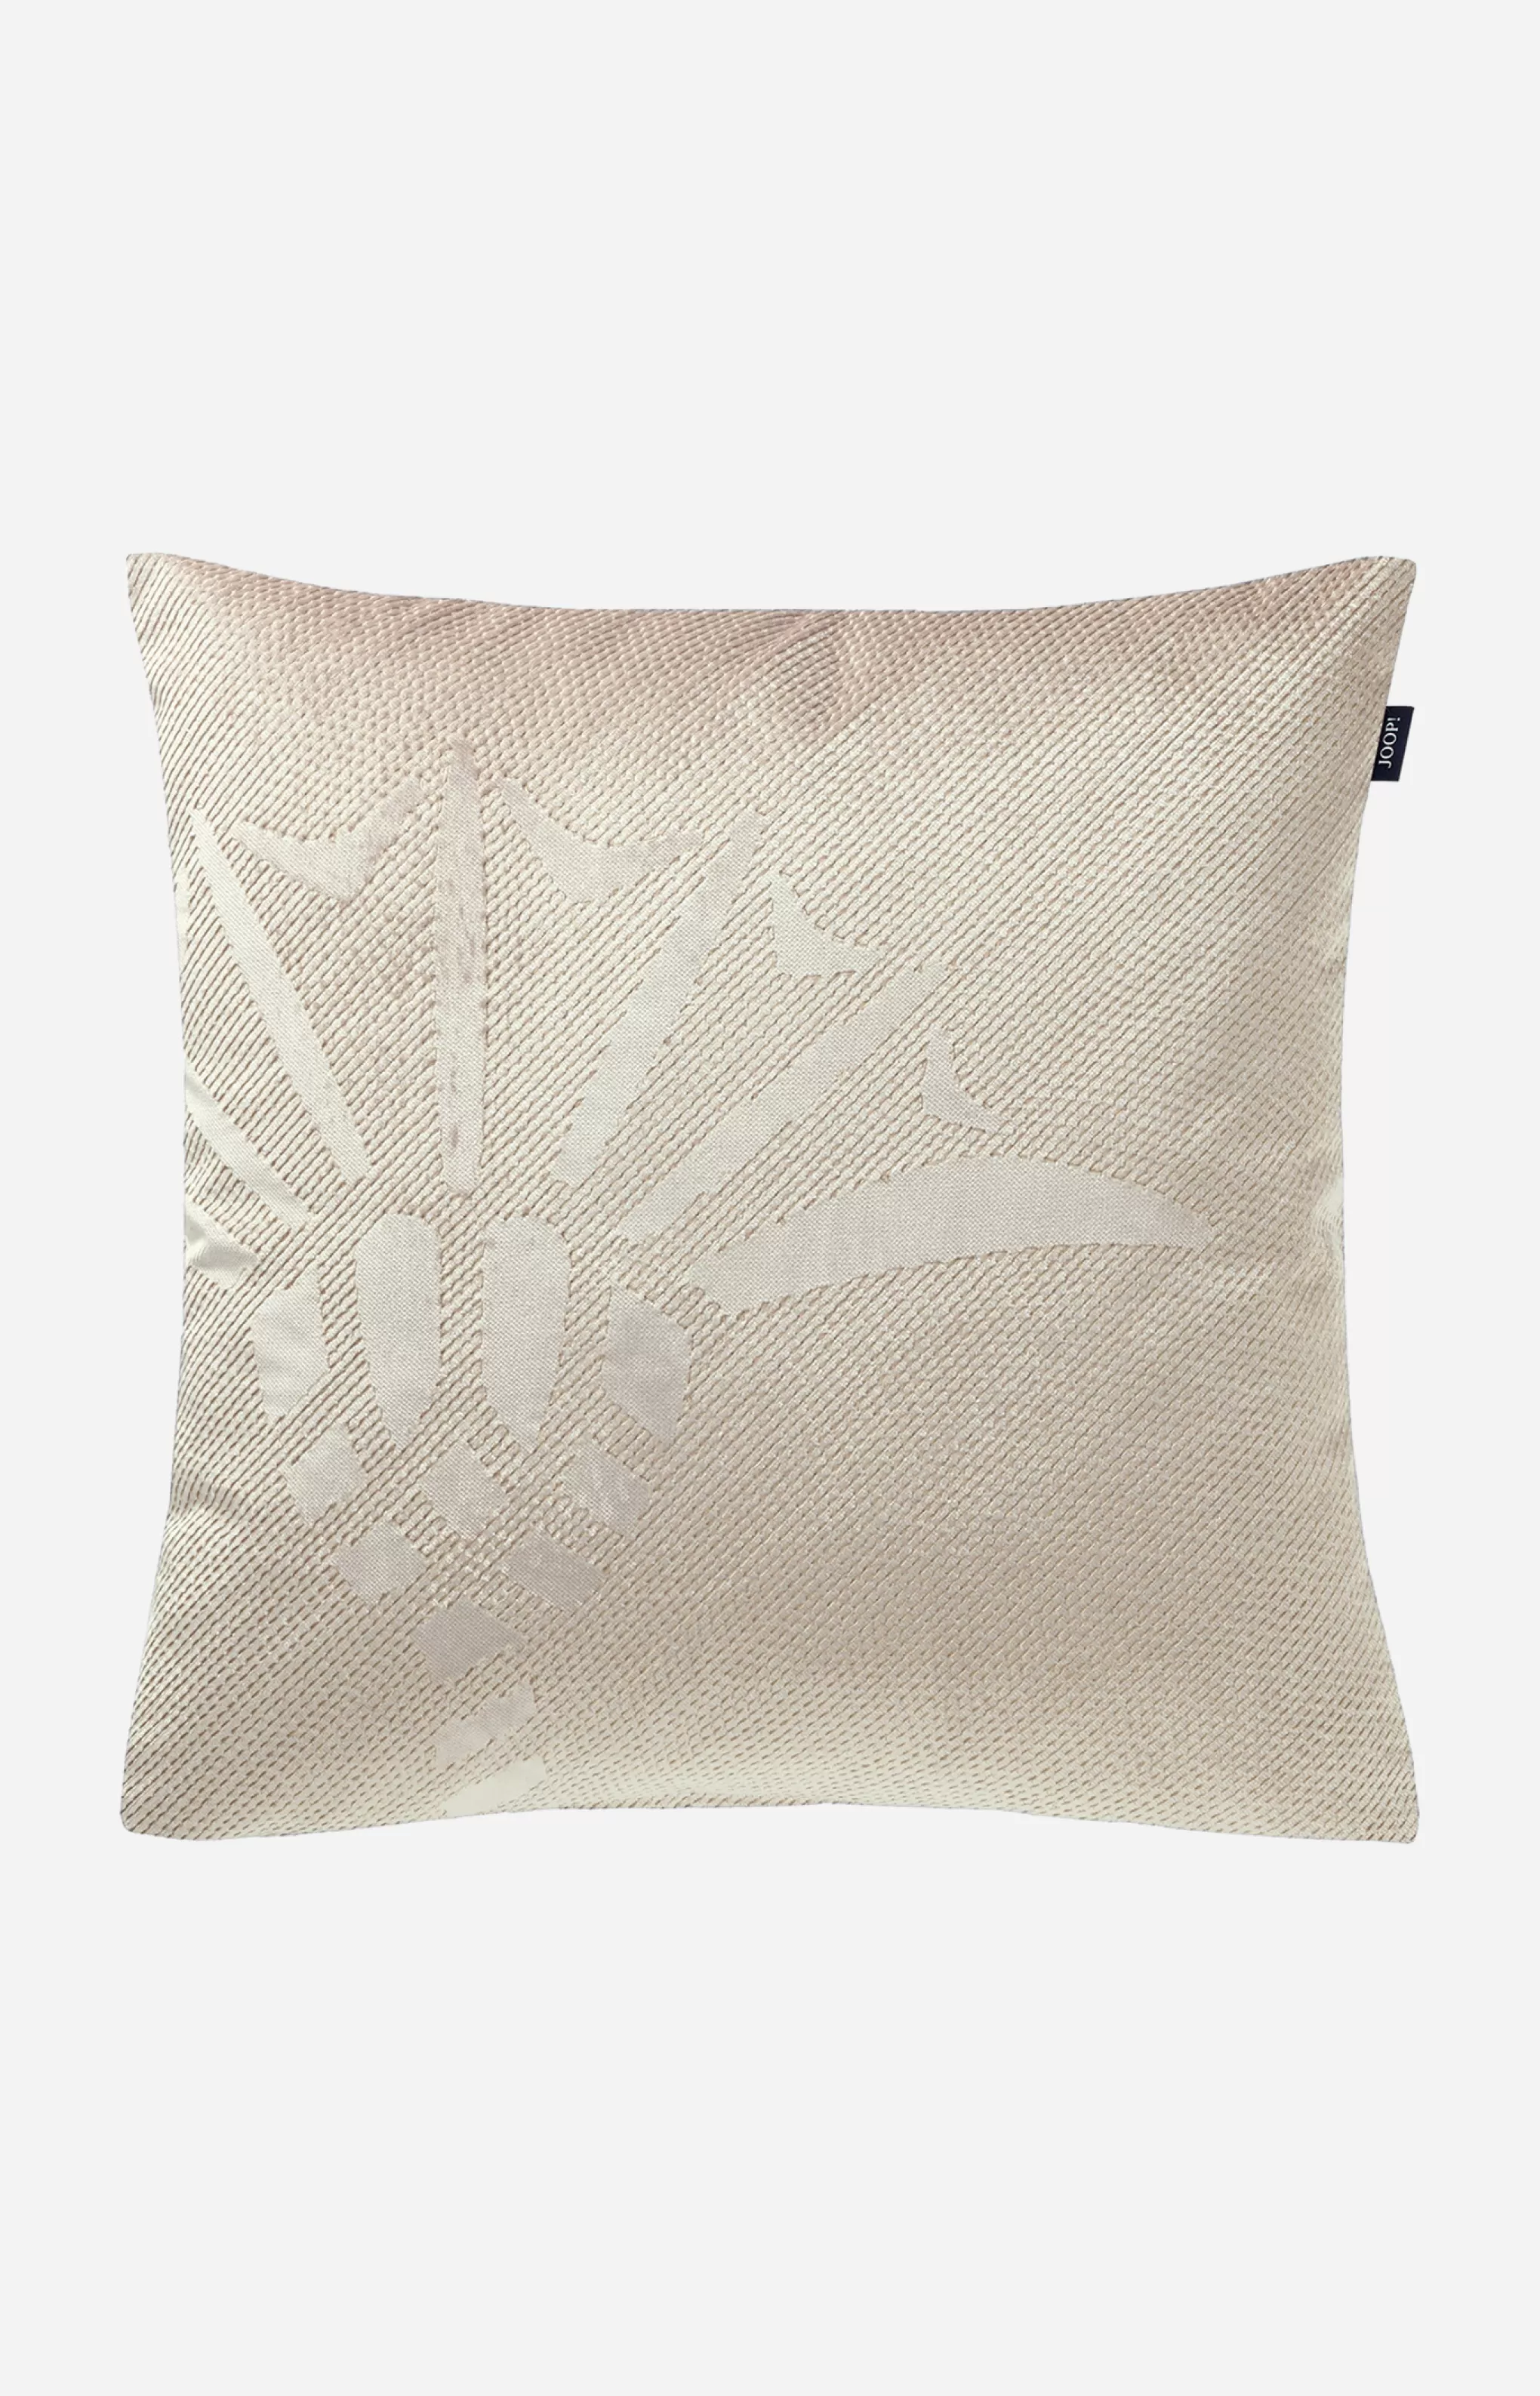 Decorative Cushions | Discover Everything*JOOP Decorative Cushions | Discover Everything ! DIMENSION decorative cushion cover in , 40 x 40 cm